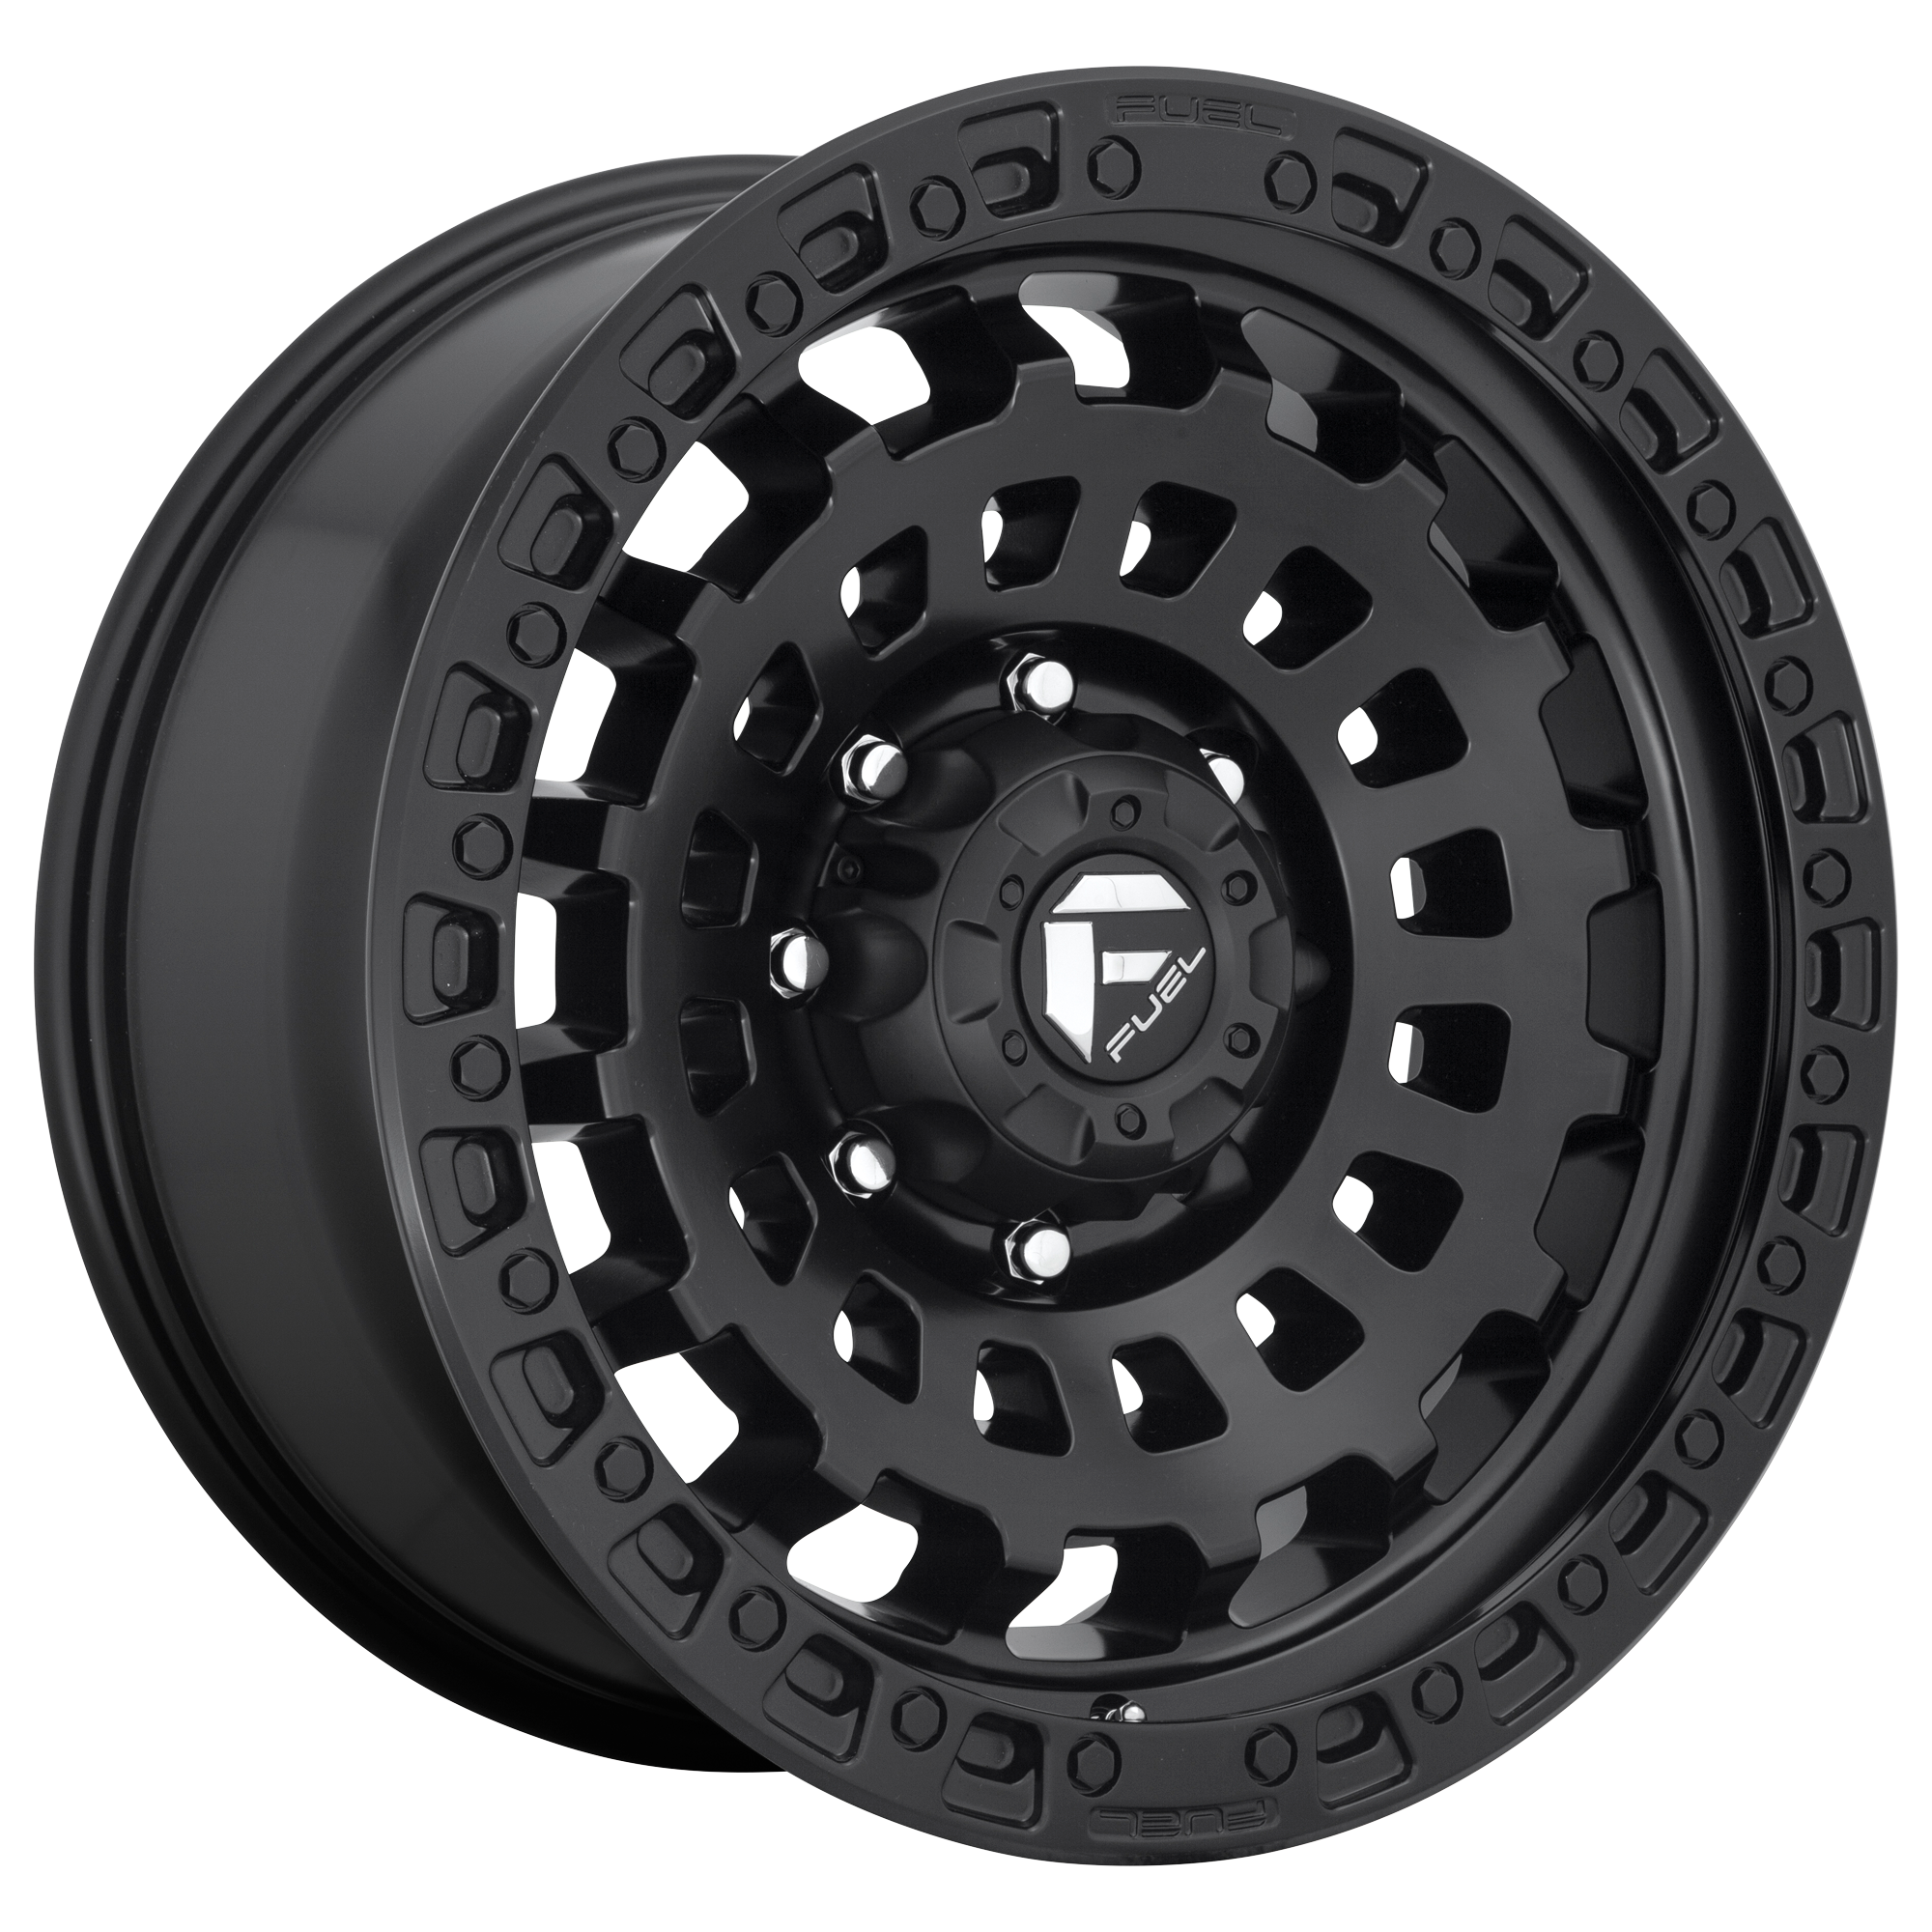 ZEPHYR 20x9 5x127.00 MATTE BLACK (1 mm) - Tires and Engine Performance